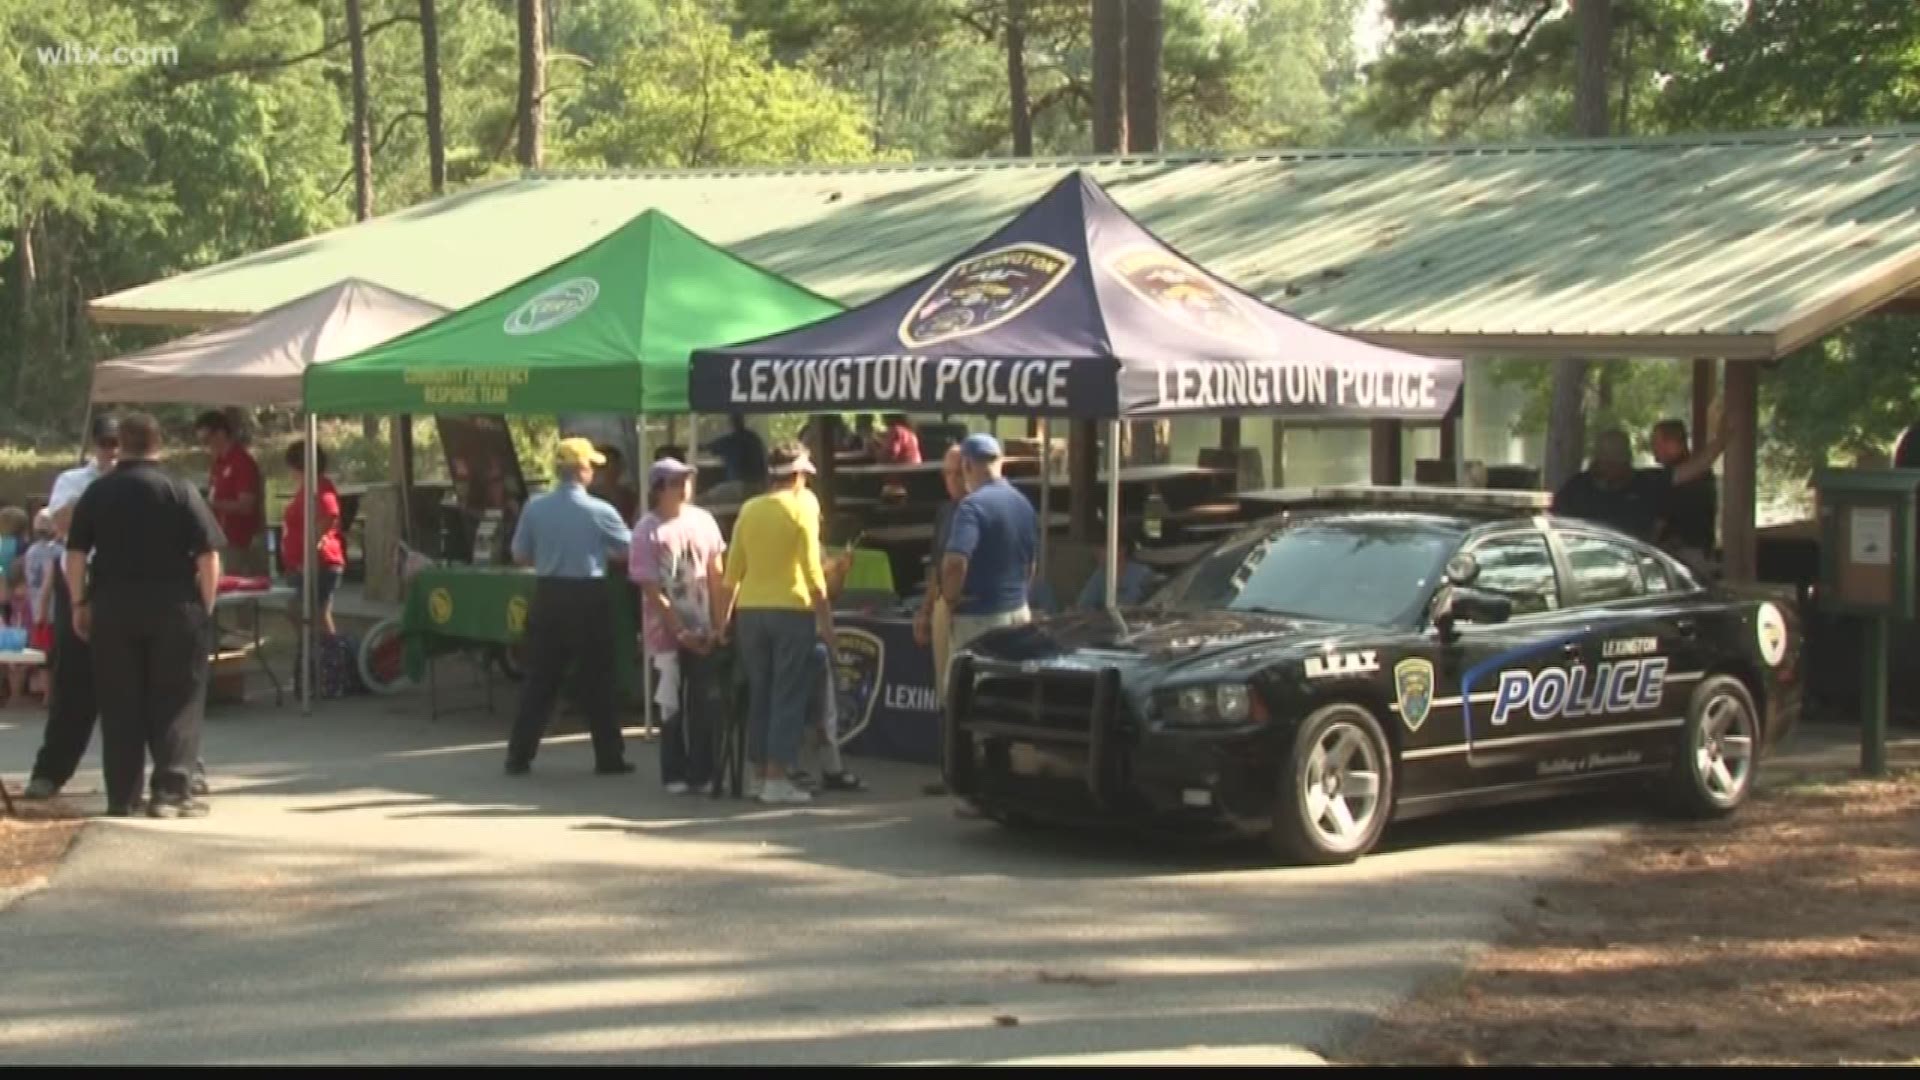 Law enforcement agencies around the country will be celebrating "National Night Out"